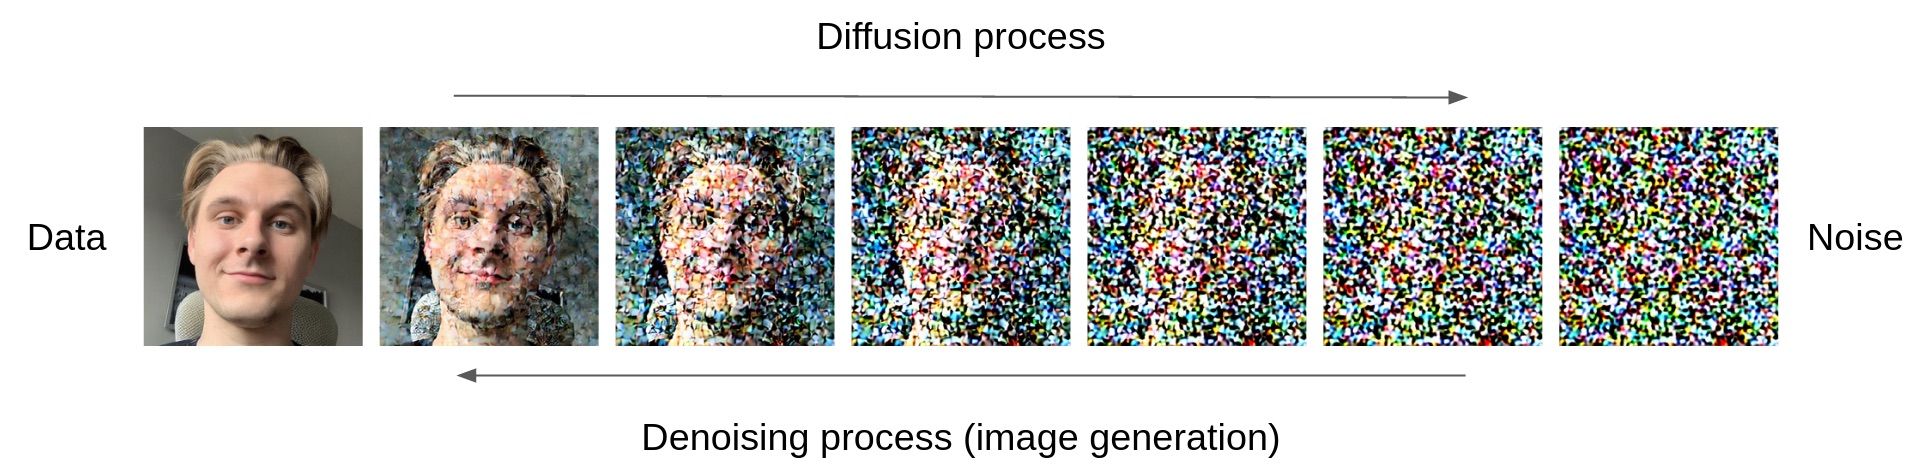 Visualization of the forward and reverse diffusion processes.